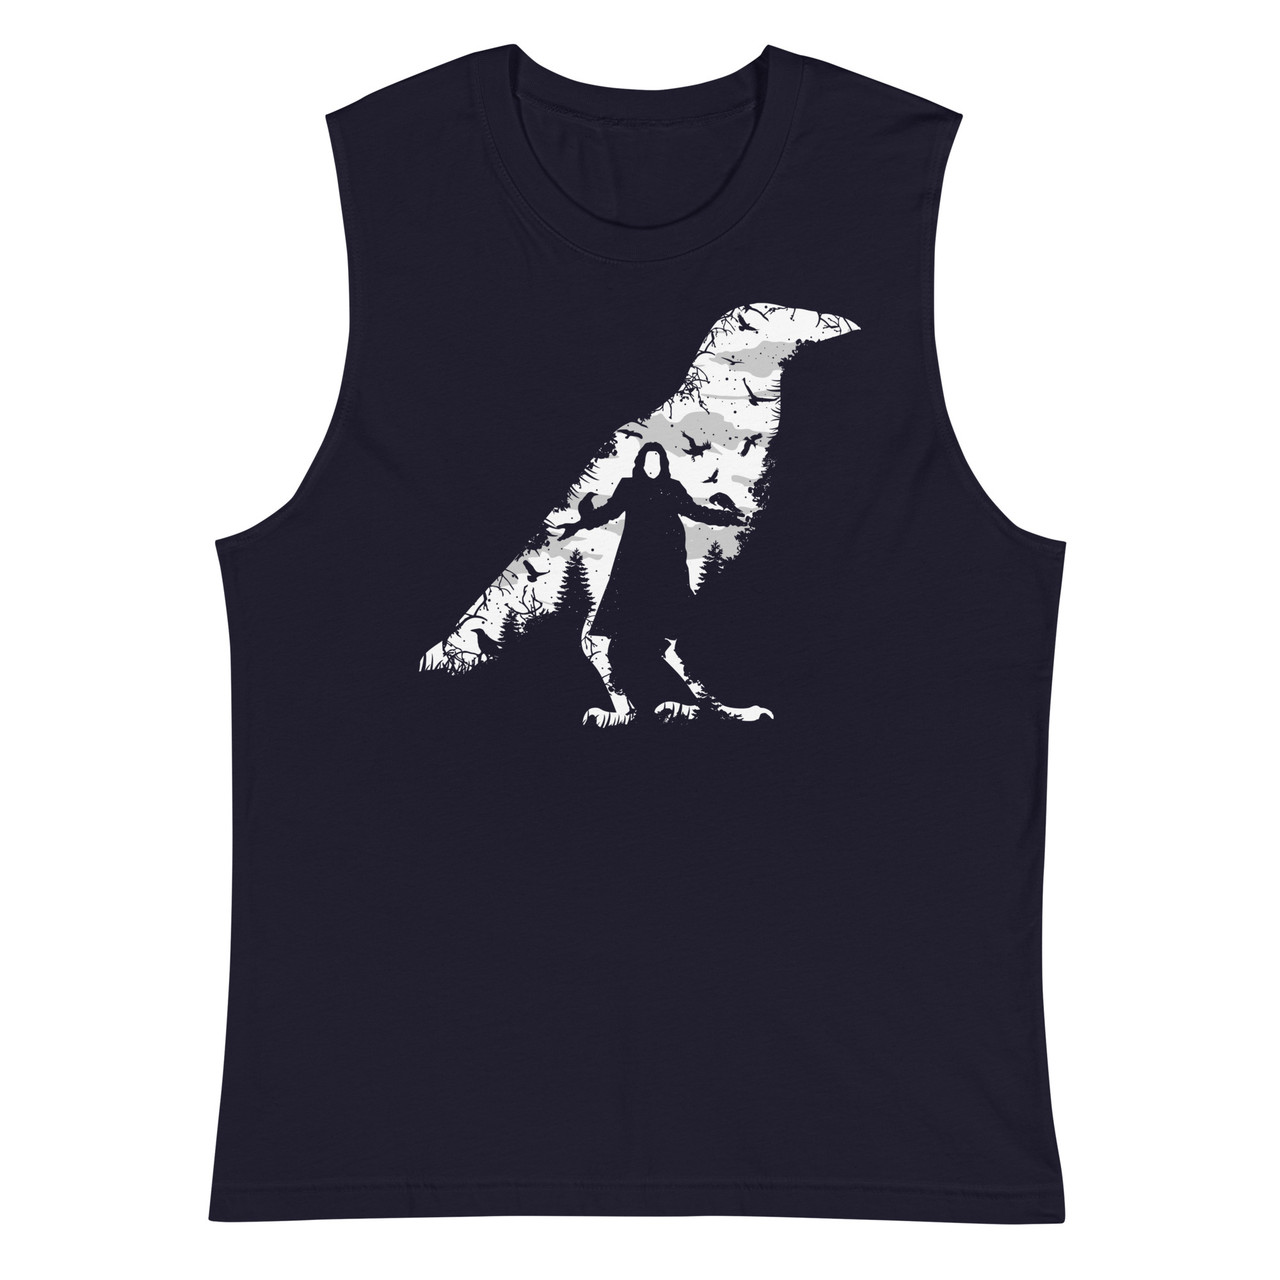 The Crow Unisex Muscle Shirt - Bella + Canvas 3483 